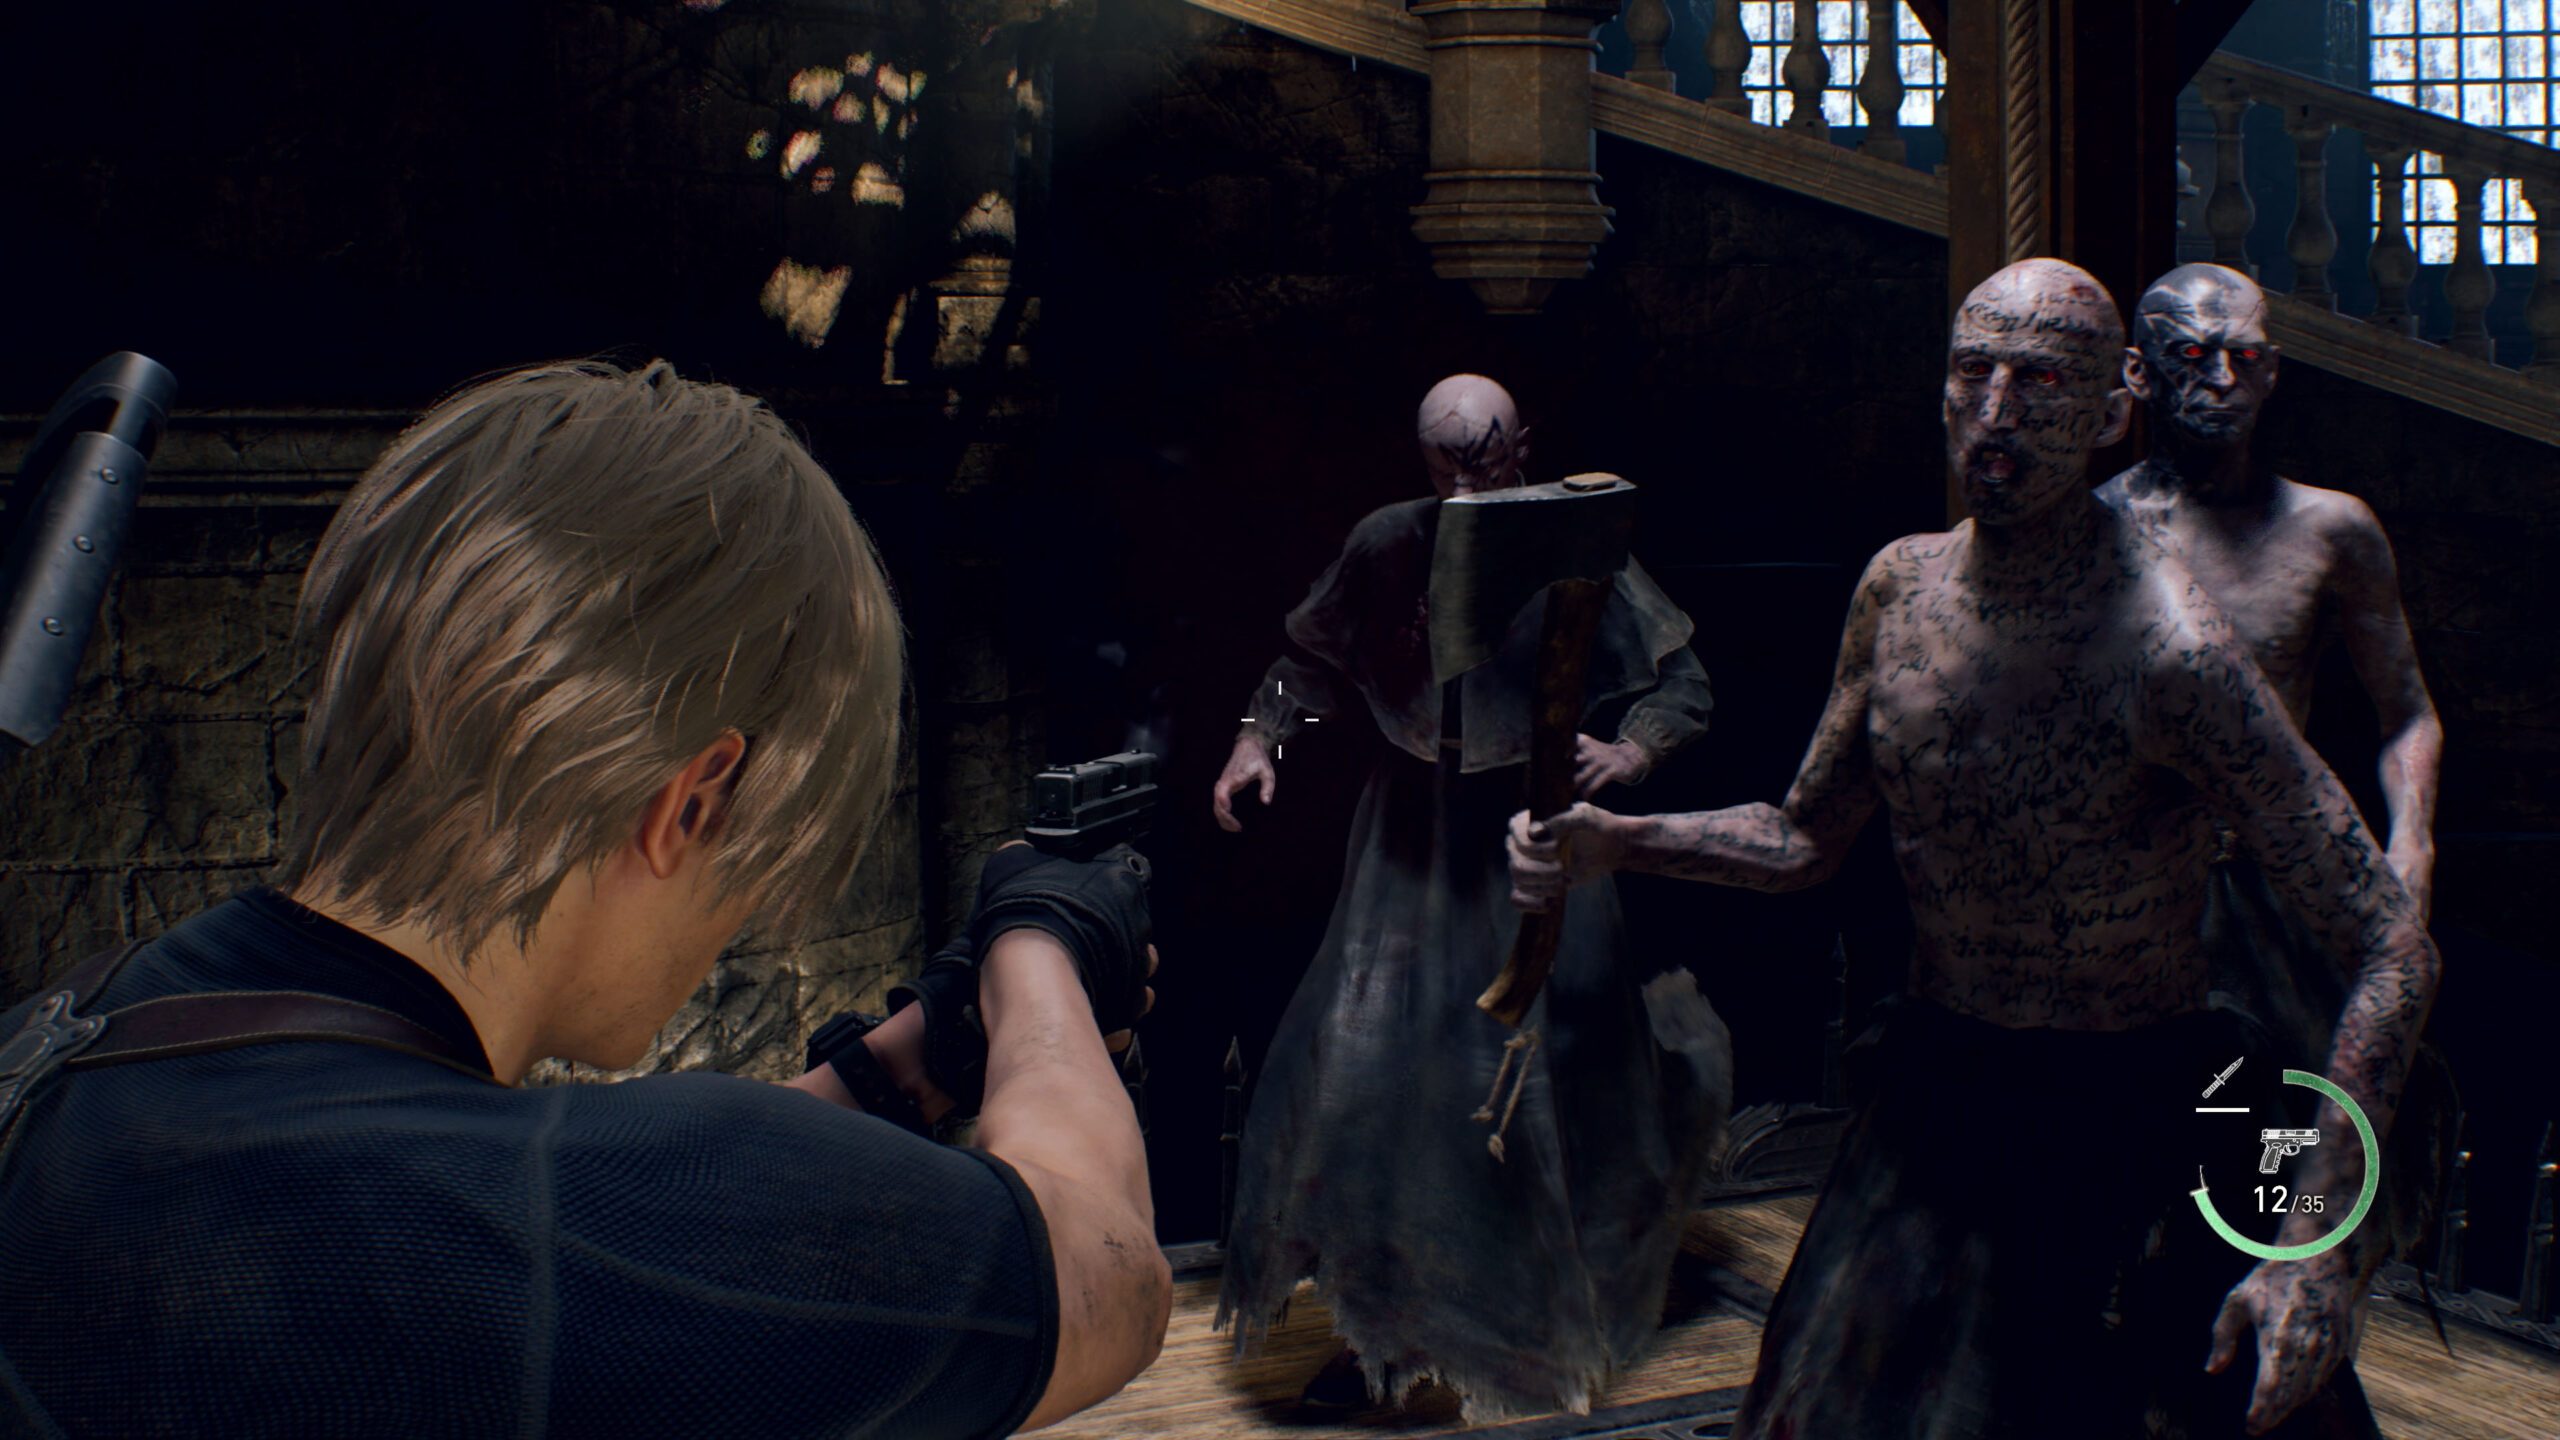 Leon takes aim as enemies, including a robed figure and a tattooed, red-eyed hatchet wielder, advance.